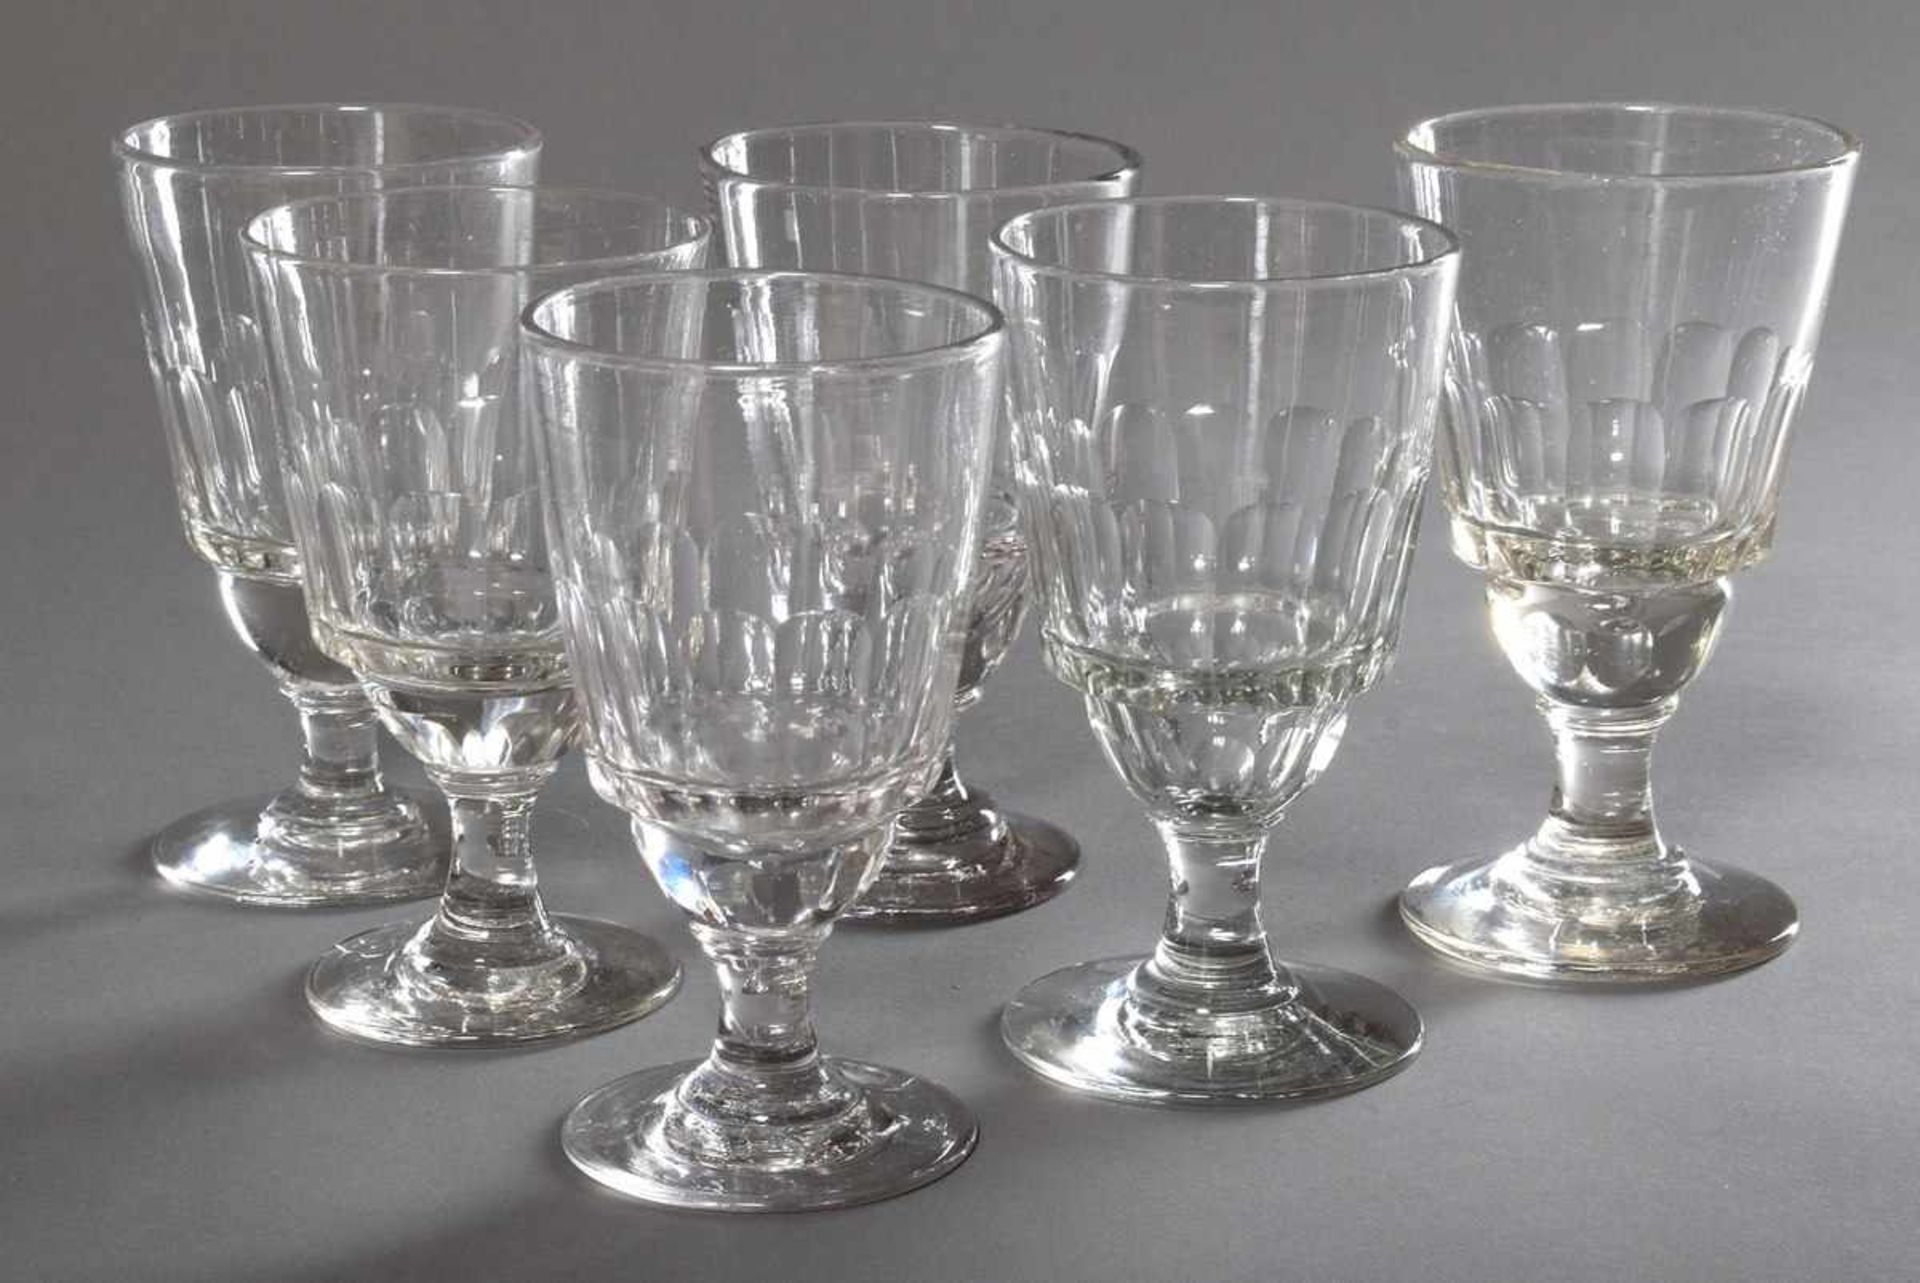 6 rustic wine glasses with half facet cut, h. 14-15cm, shape slightly varying